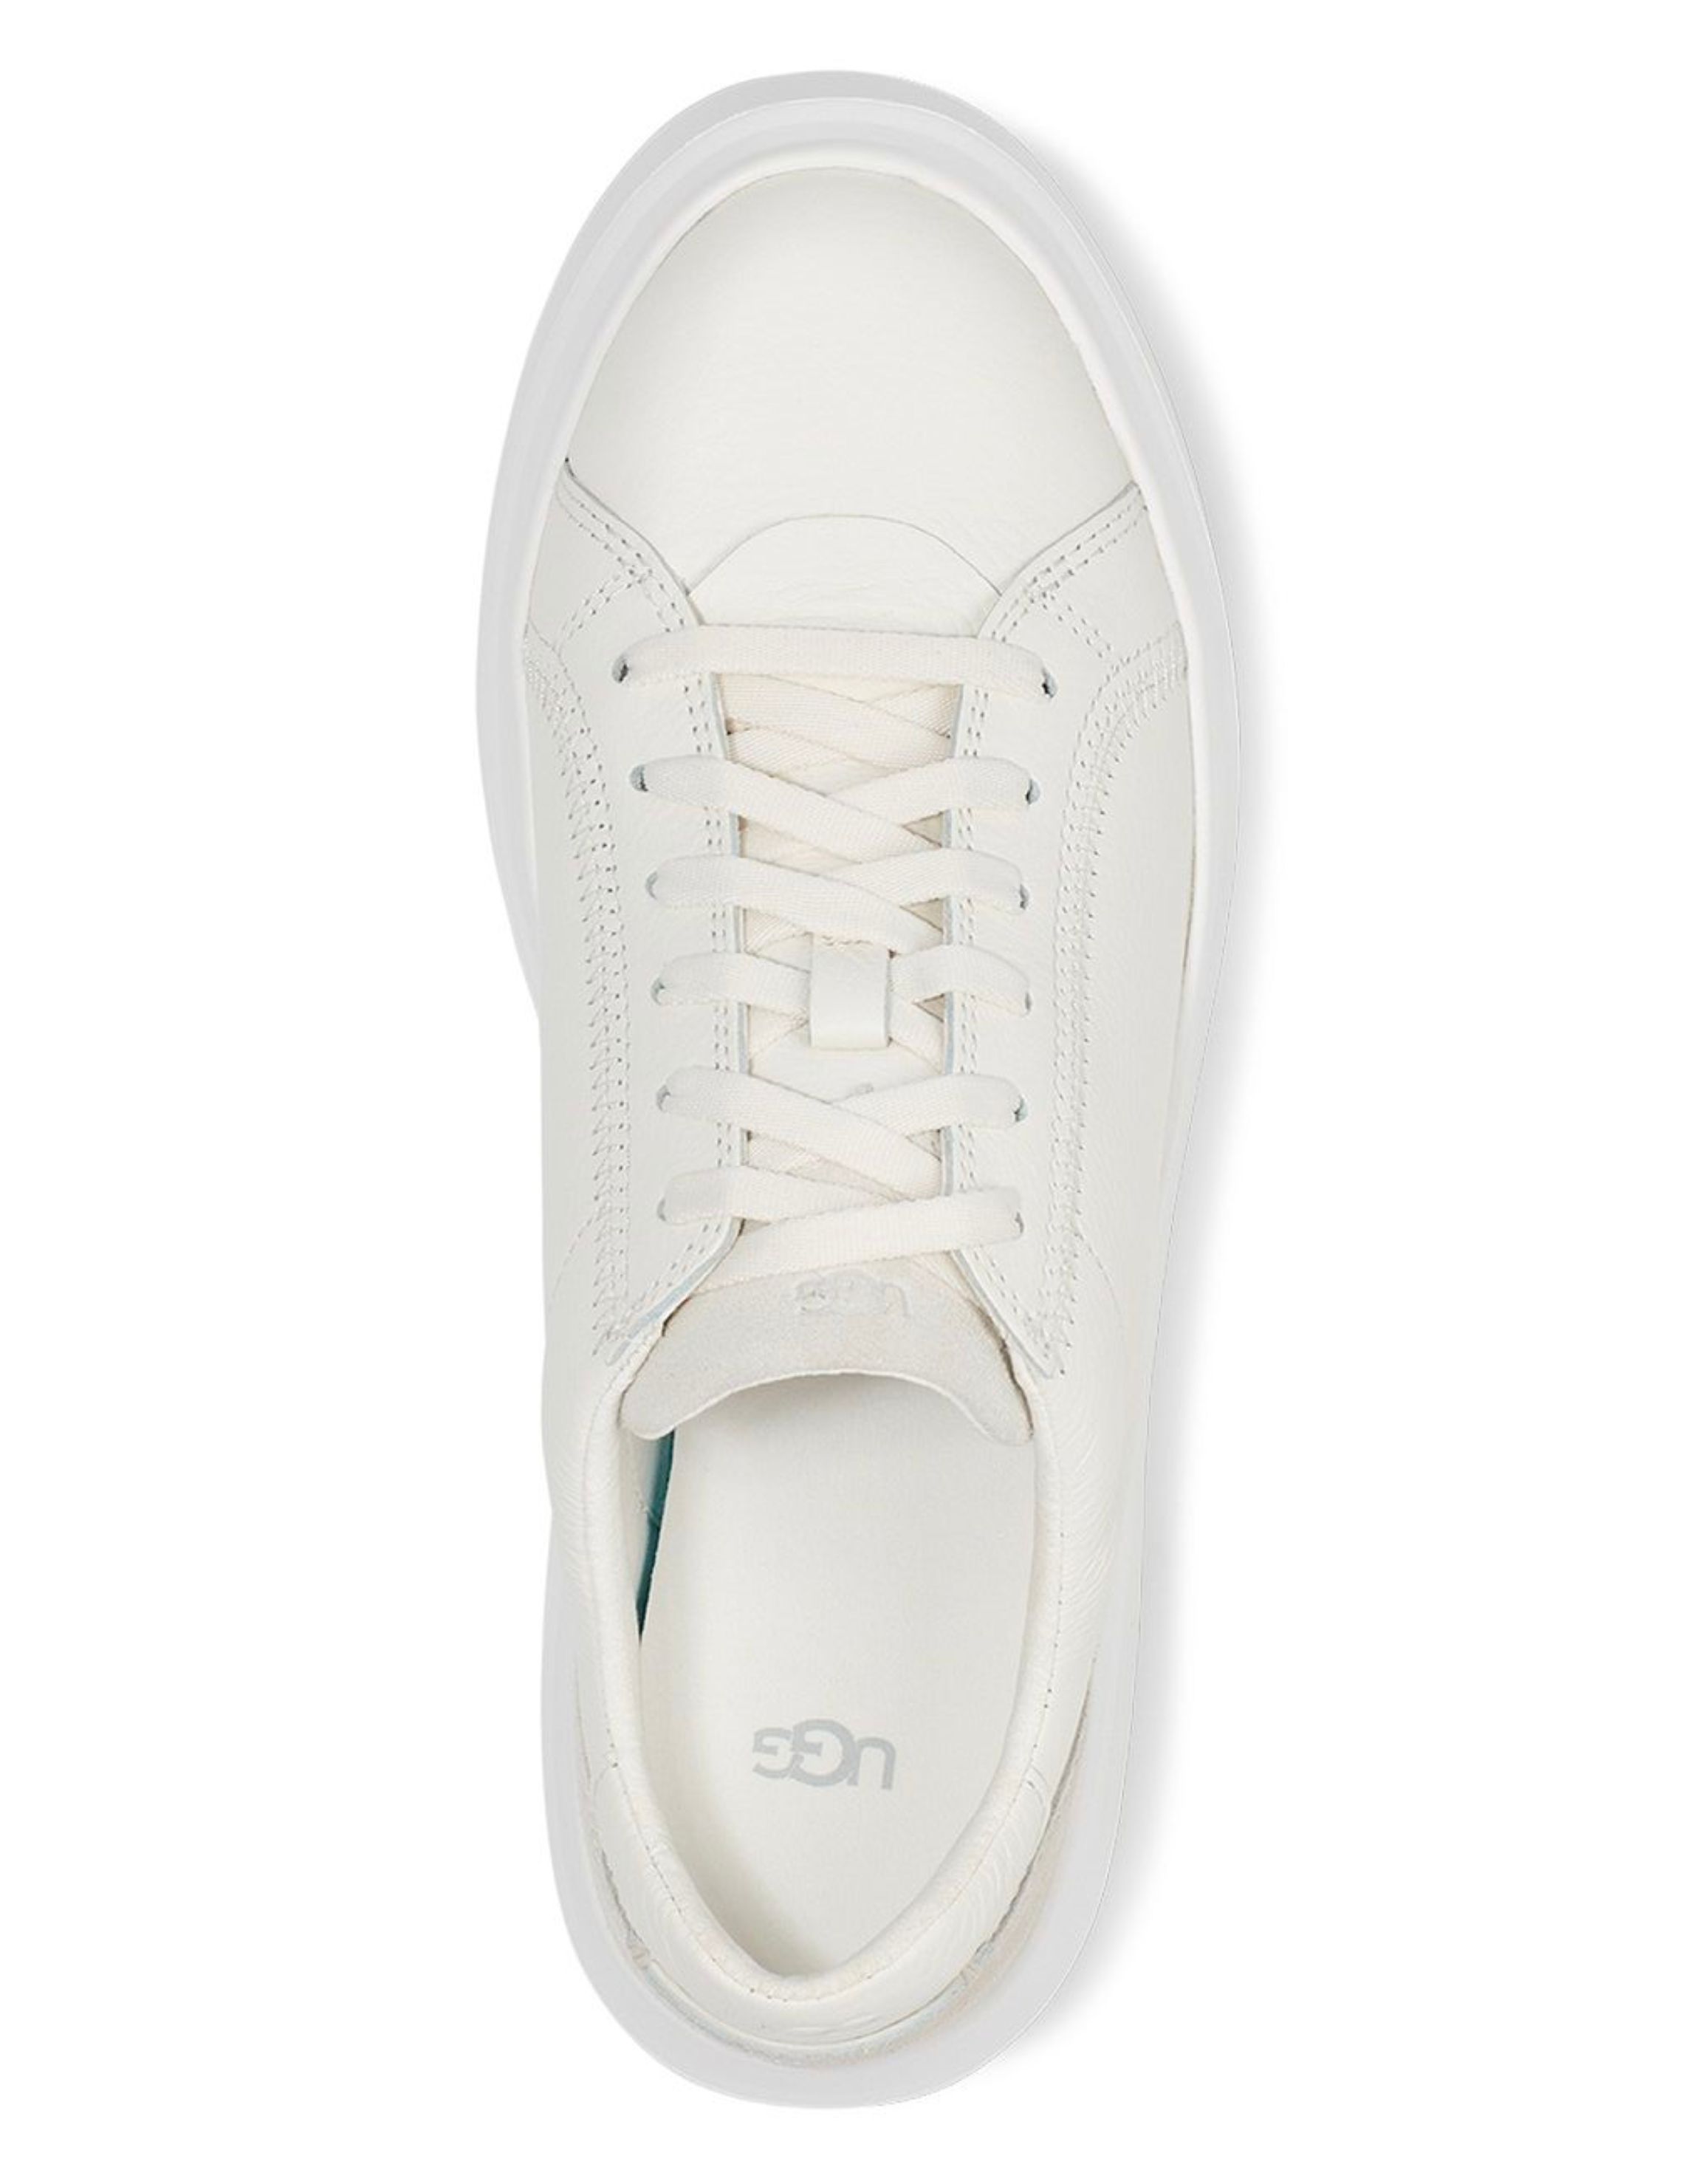 UGG WHITE SCAPE LACE SNEAKER | Rosella - Style inspired by elegance